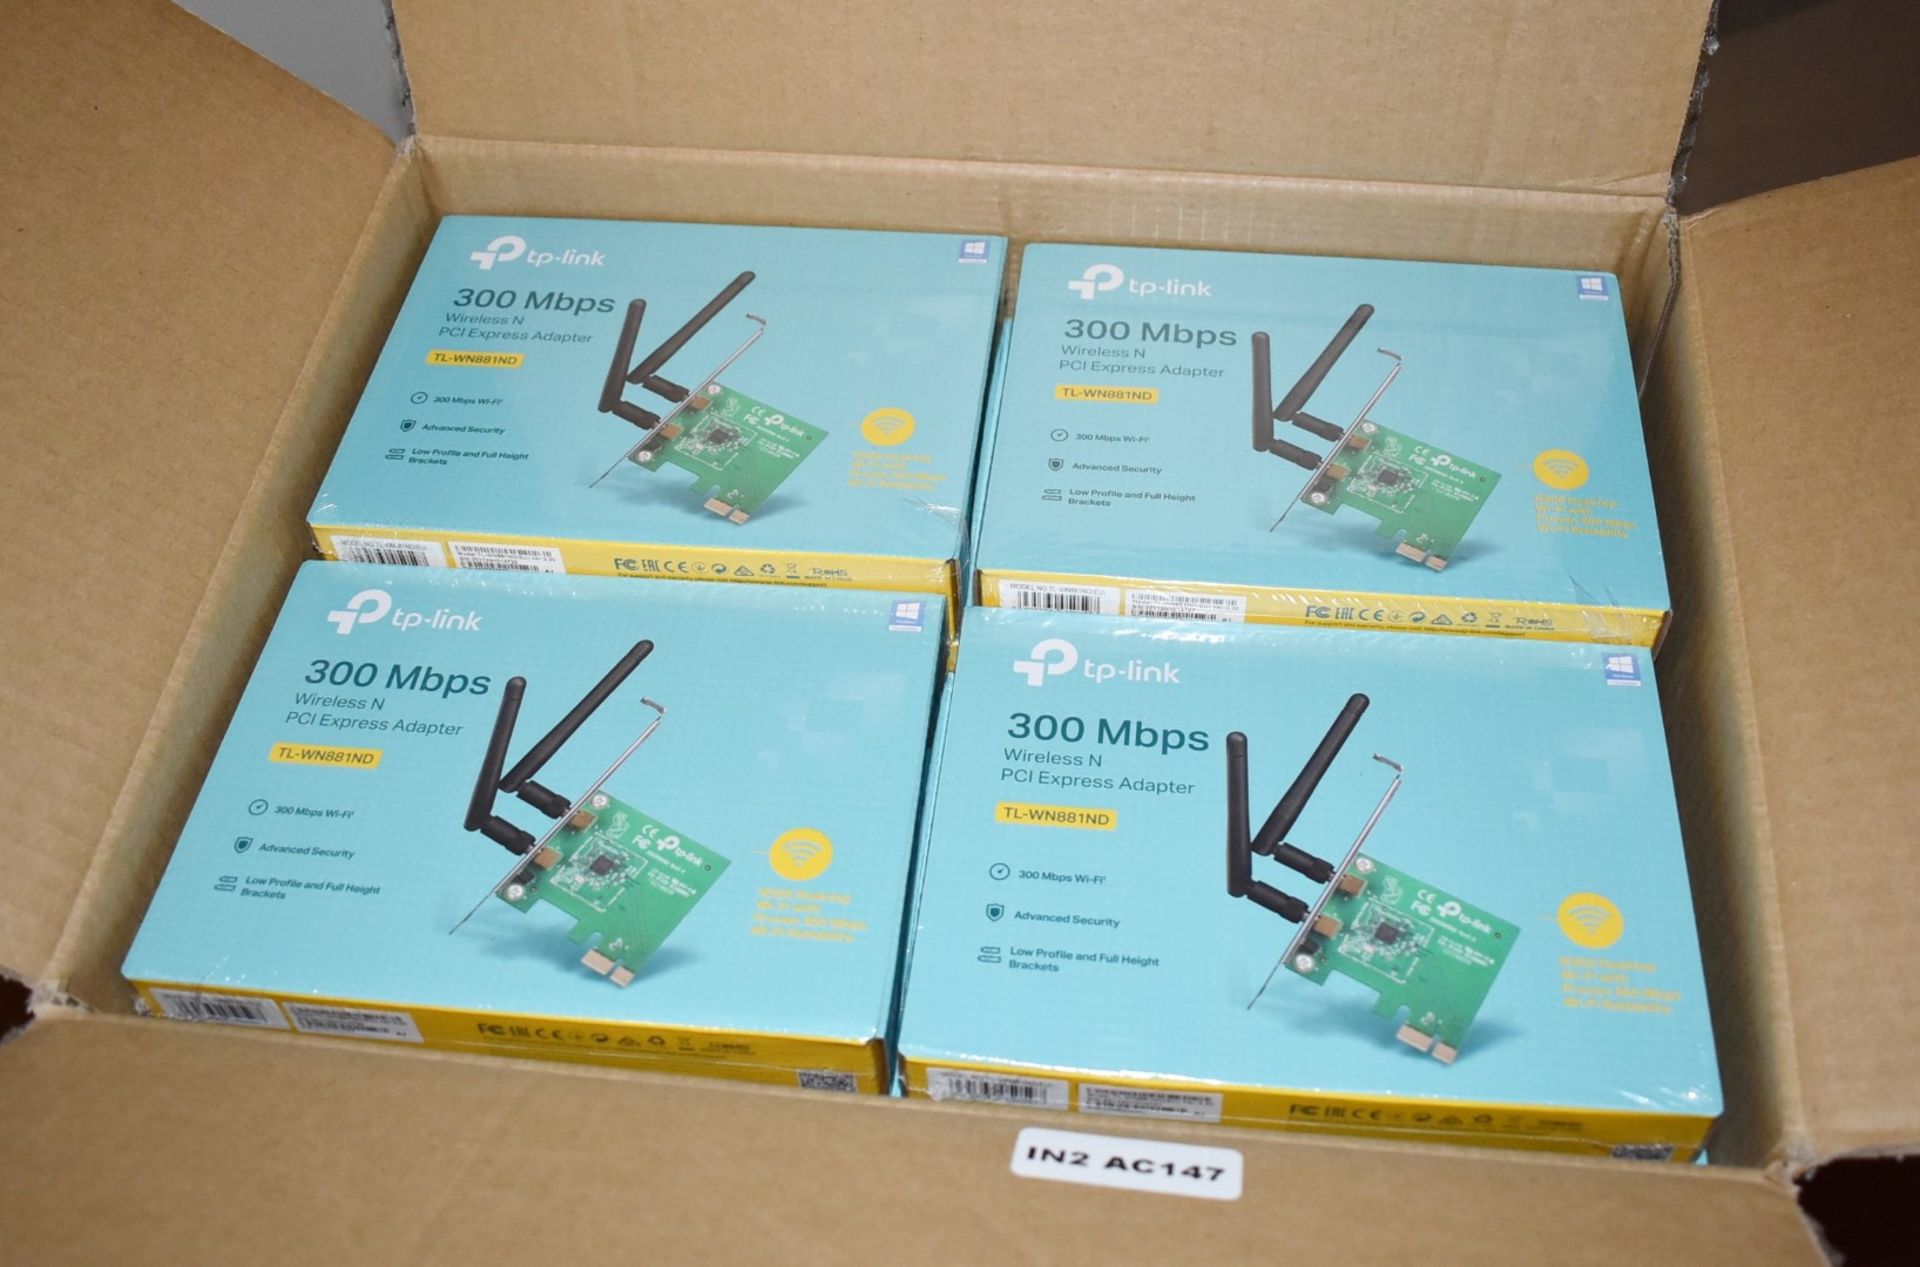 10 x TP-Link TL-WN881ND 300mbps Wireless N Pci Express Adapters - New Boxed Stock - RRP £180 -